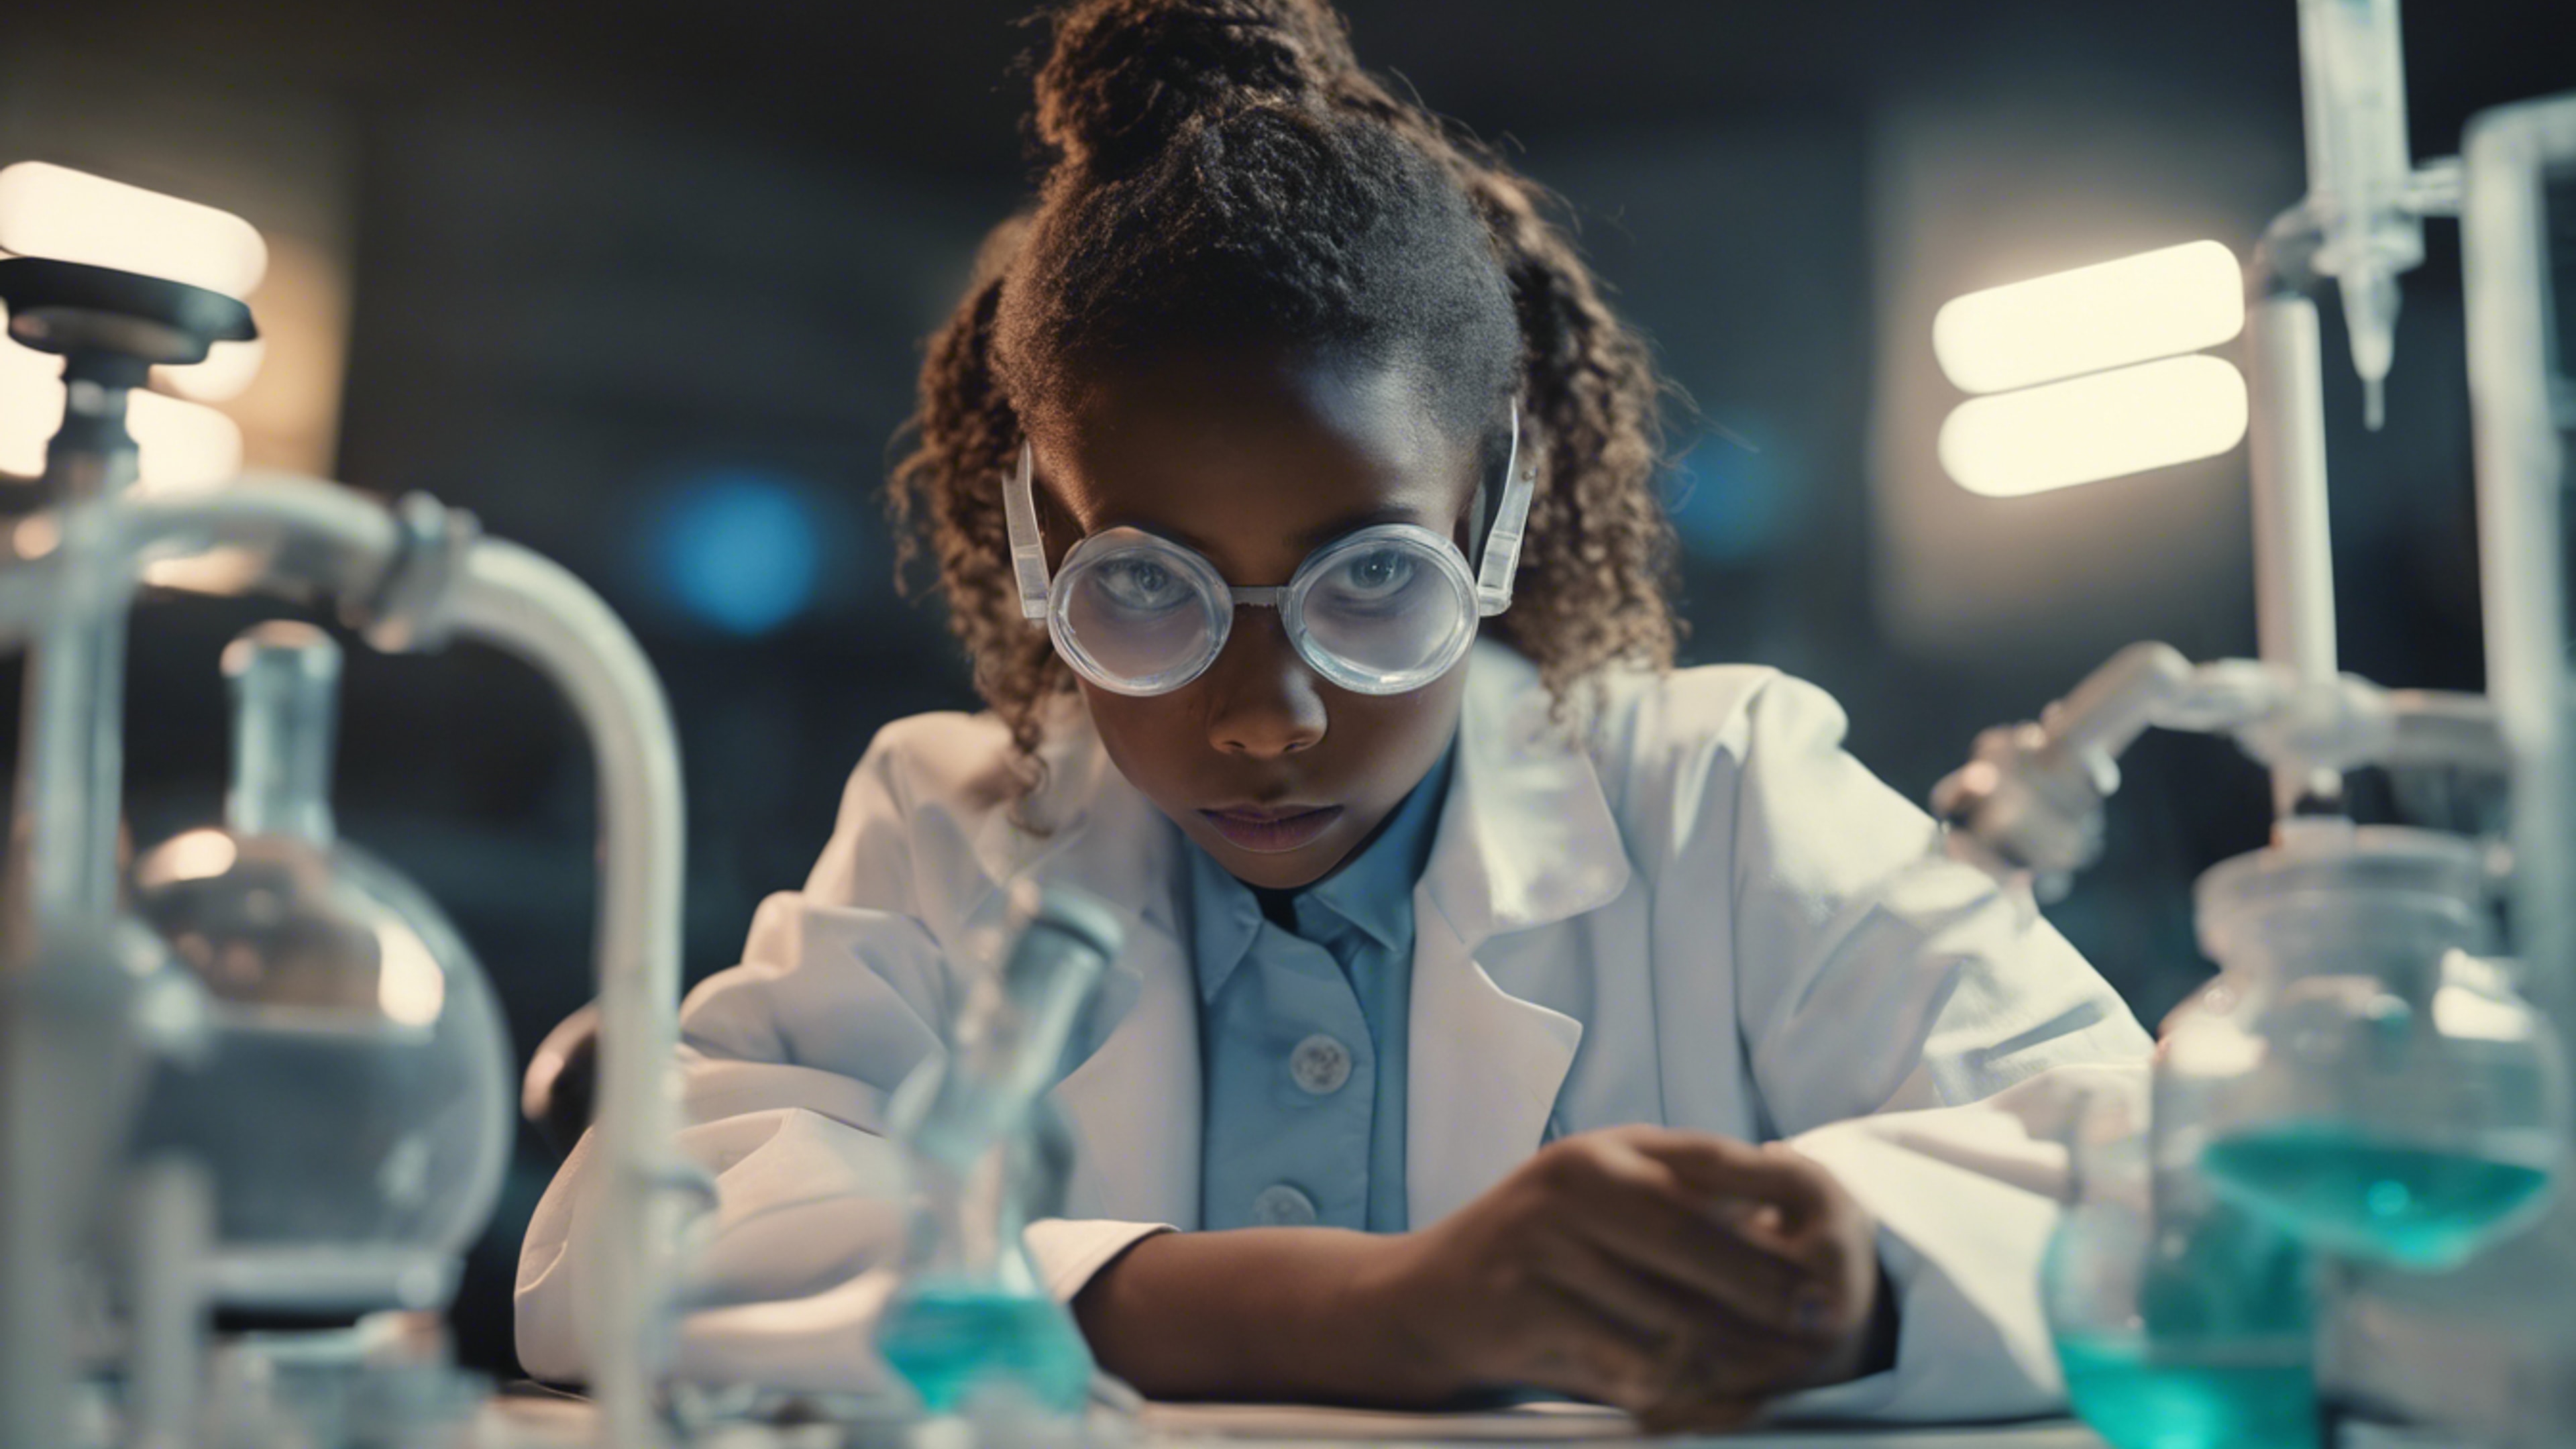 A young black girl wearing goggles and lab coat immersed in doing science experiment. Wallpaper[448c919503a247f79693]